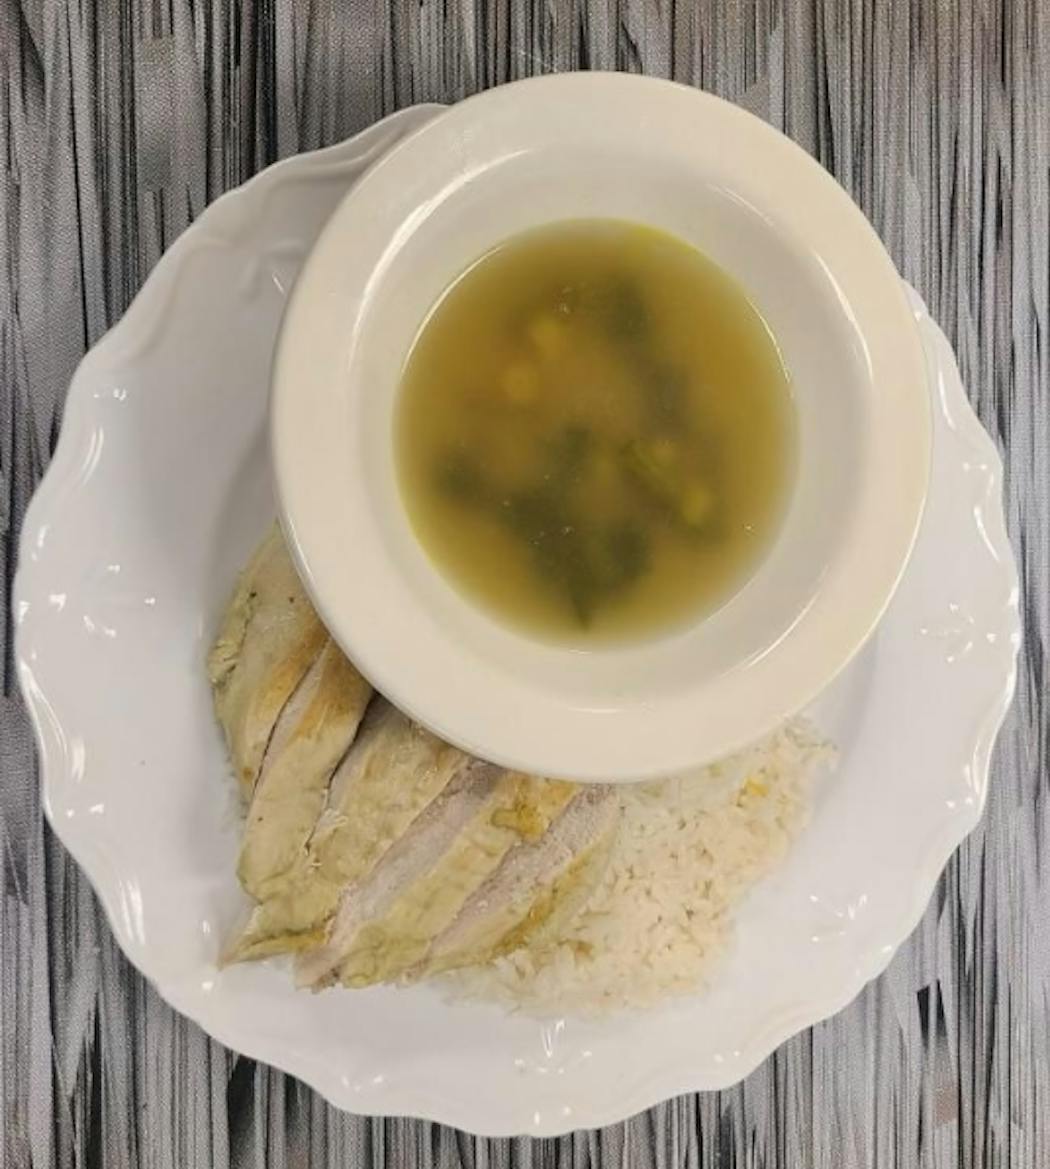 At  M Health Fairview St. John's Hospital, patients can order traditional Hmong chicken herb soup right off the menu. A Hmong tradition is for postpartum women to eat this soup, along with rice, for the first 30 days after giving birth.